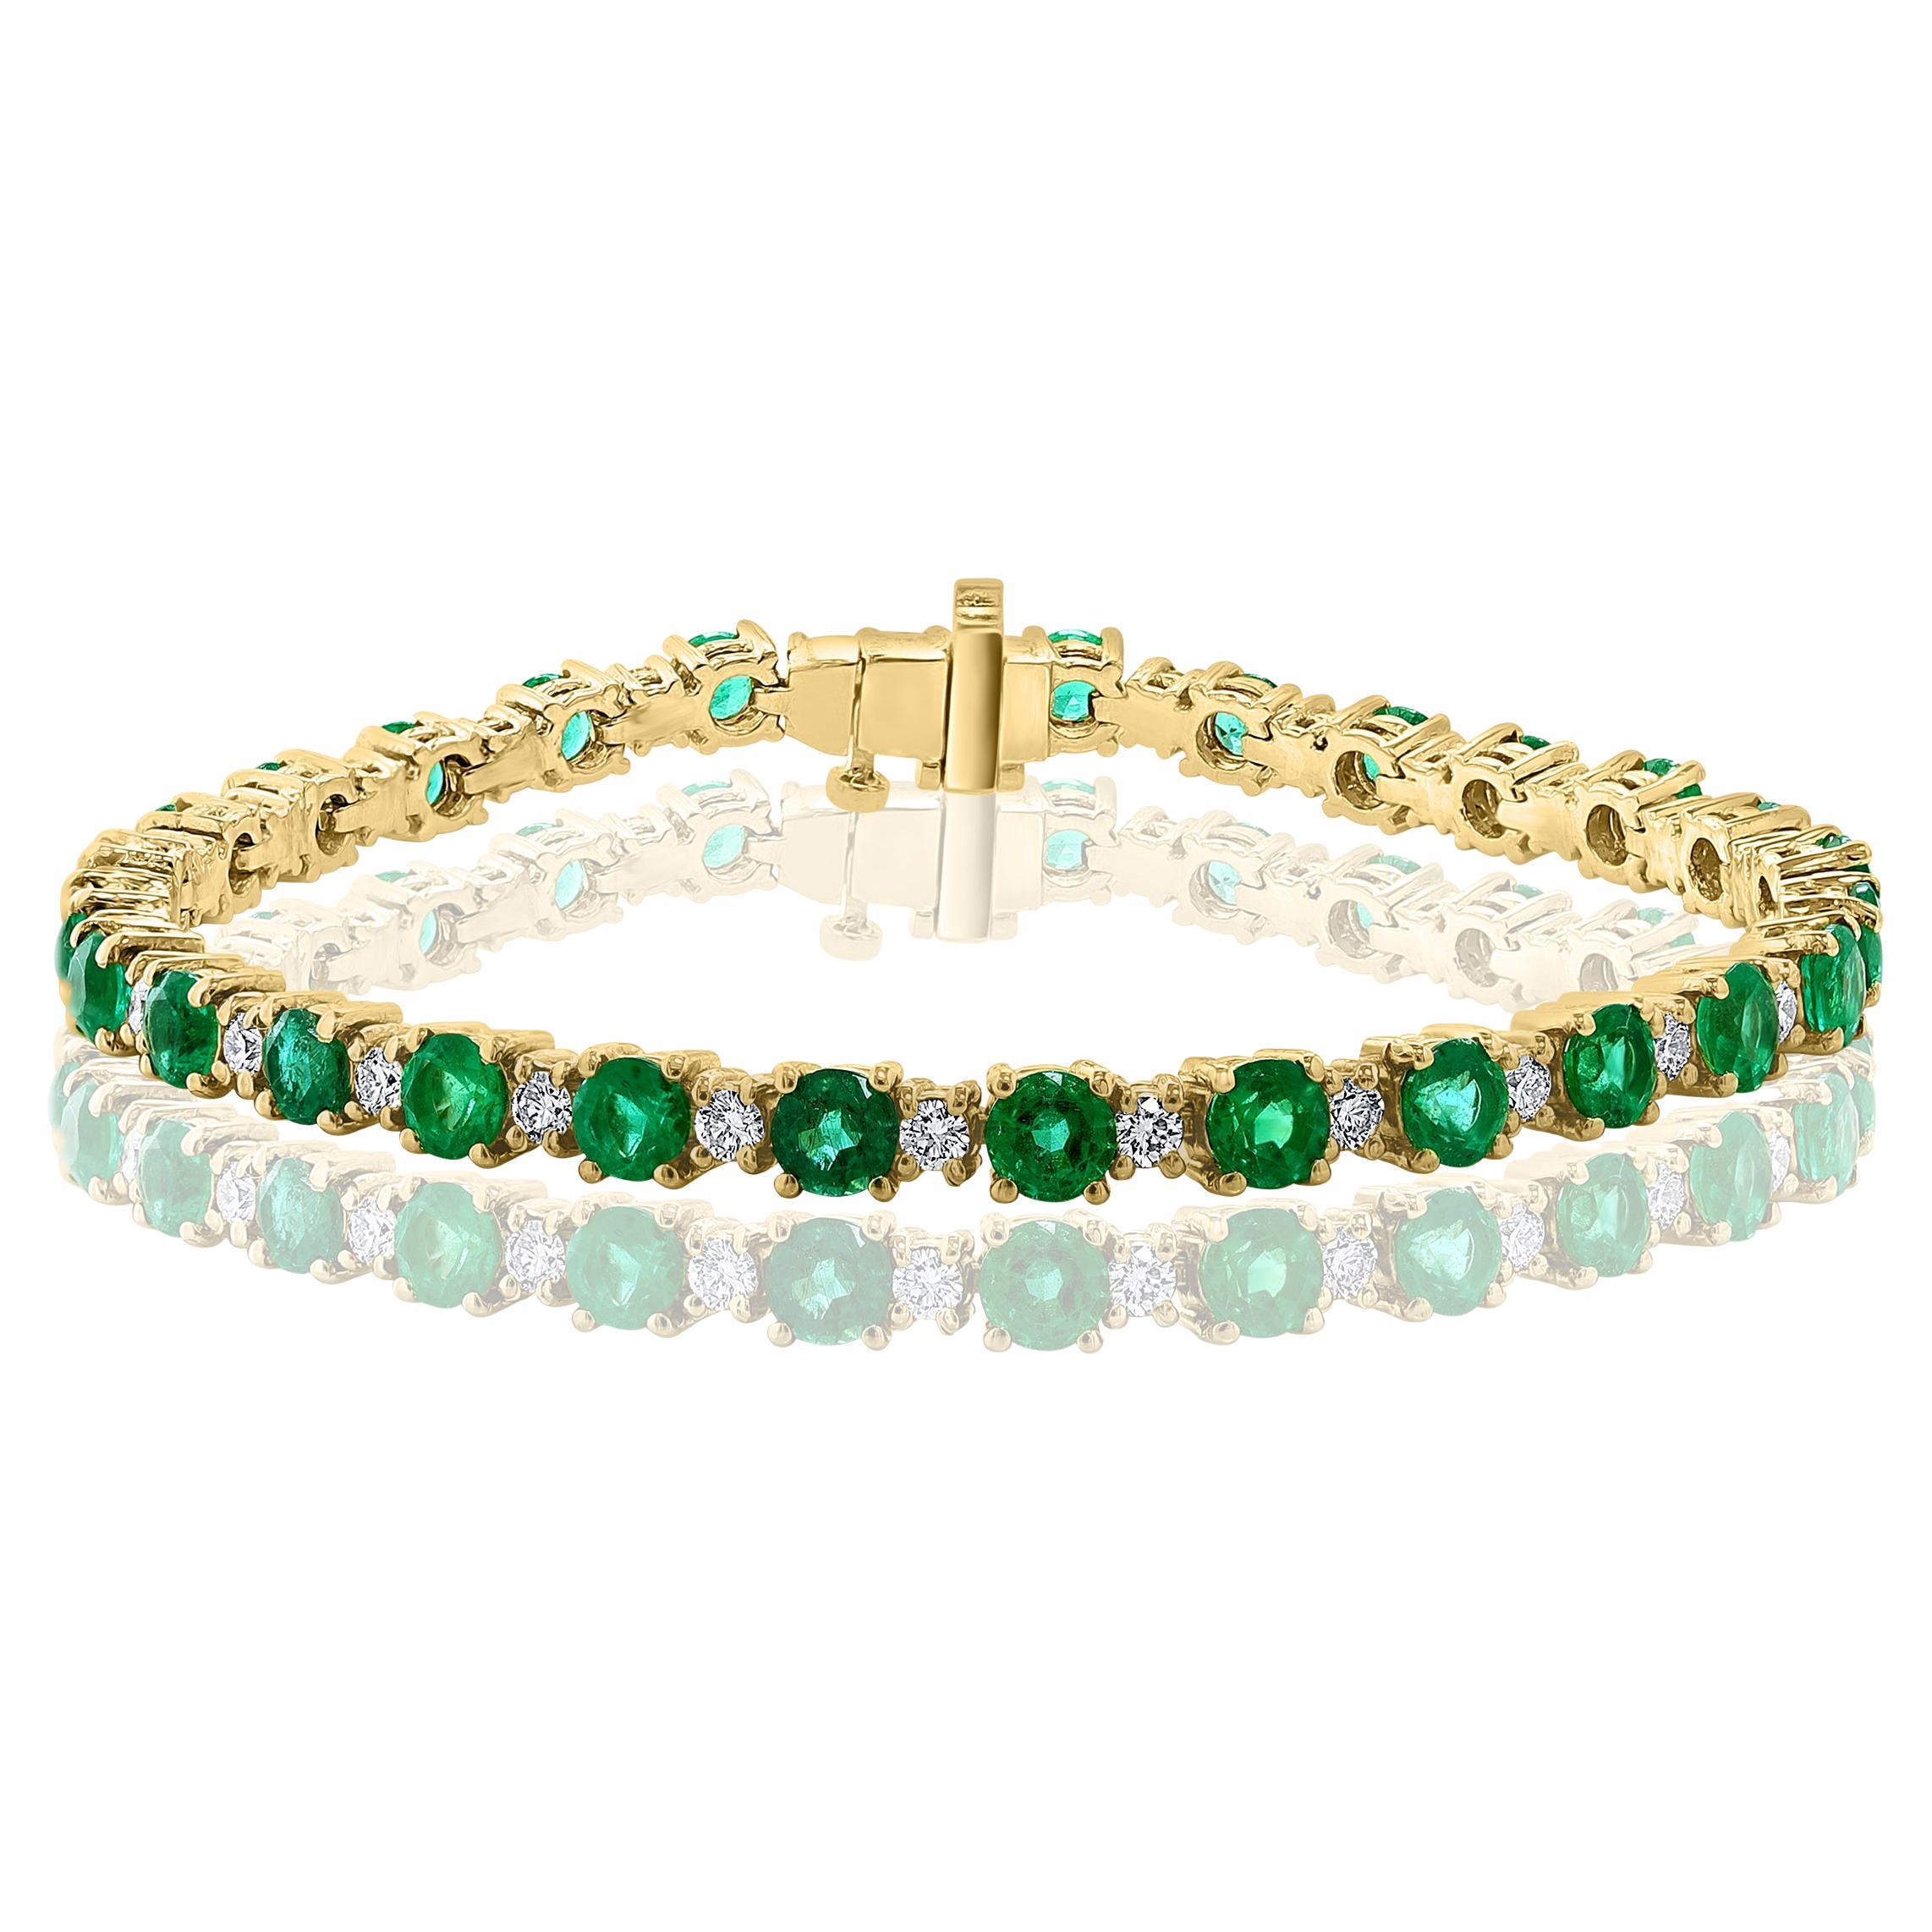 6.70 Carat Alternating Emerald and Diamond Tennis Bracelet in 14K Yellow Gold For Sale